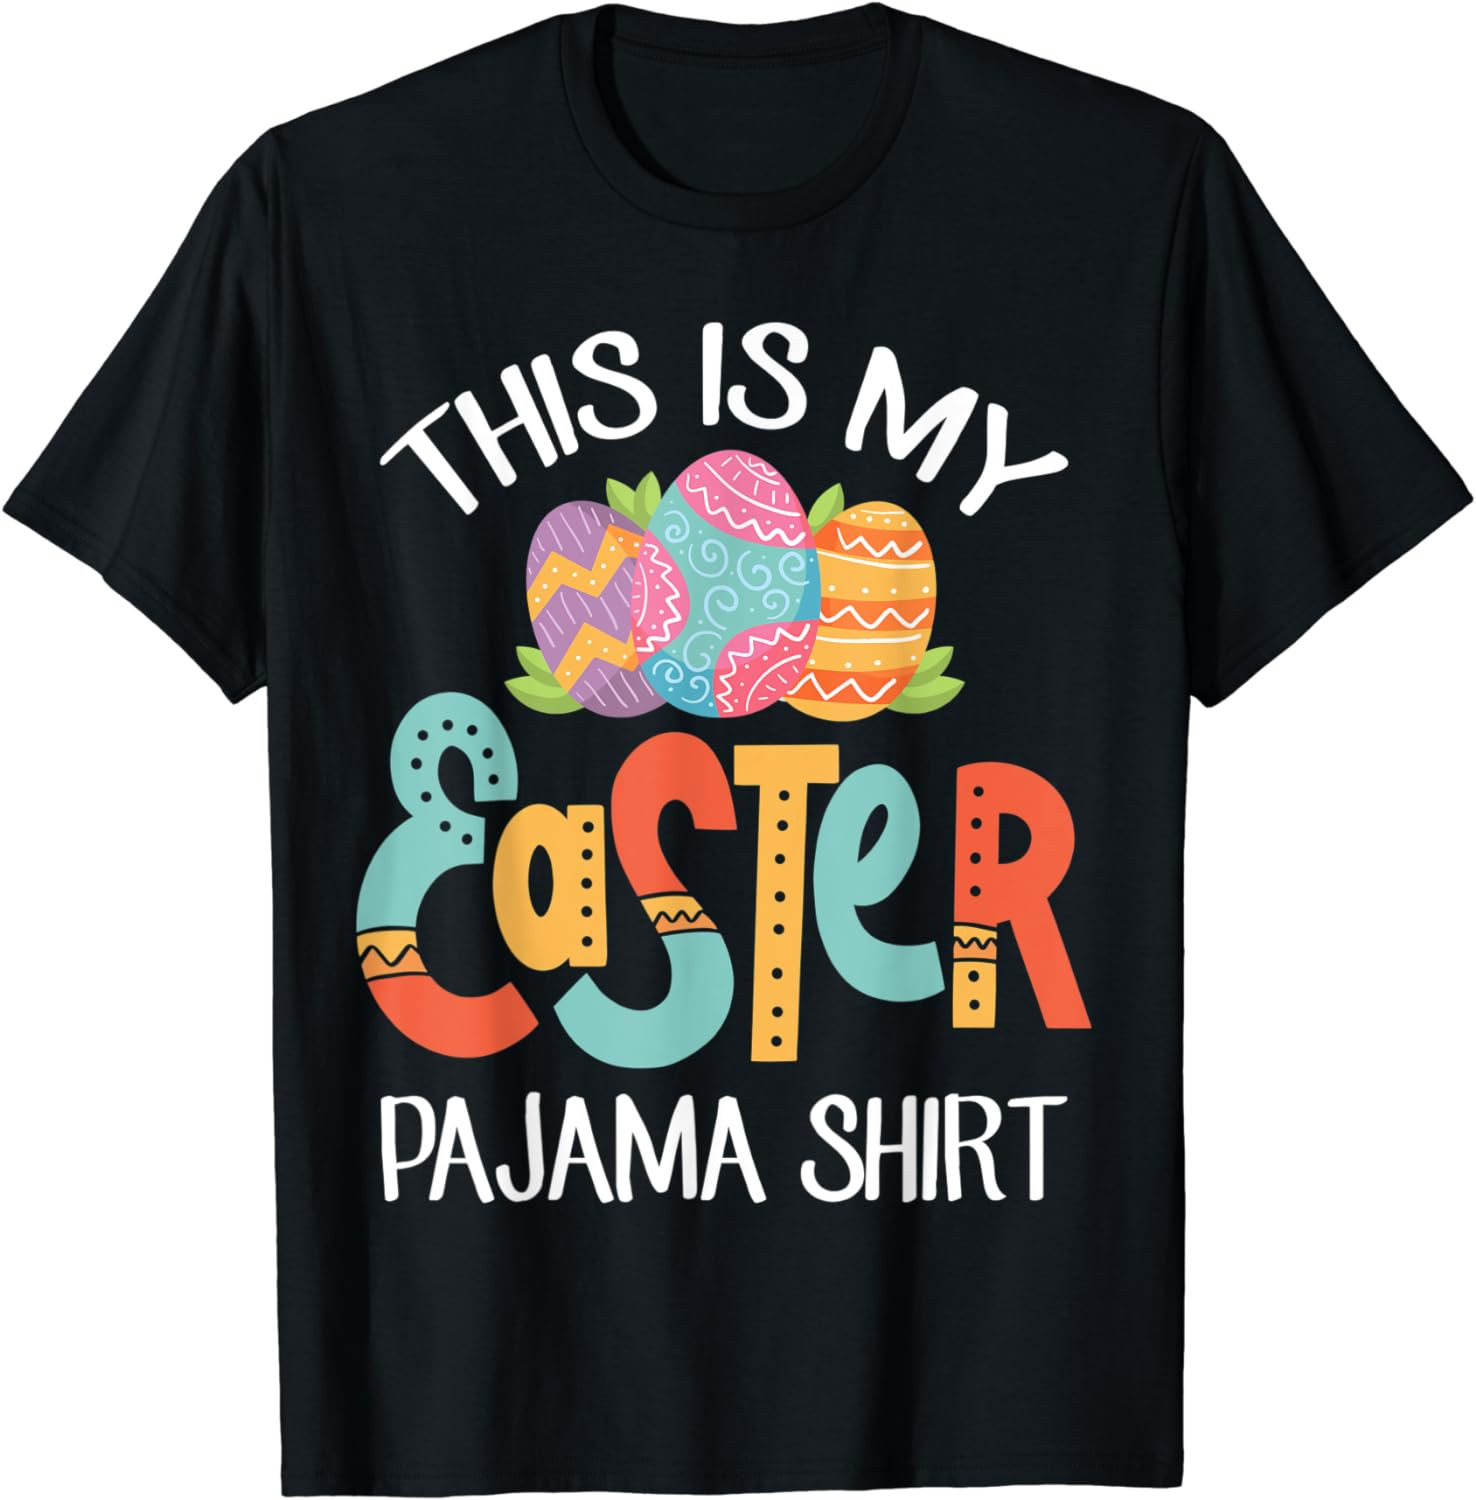 This Is My Easter Pajama Shirt Funny Easter Day T-Shirt